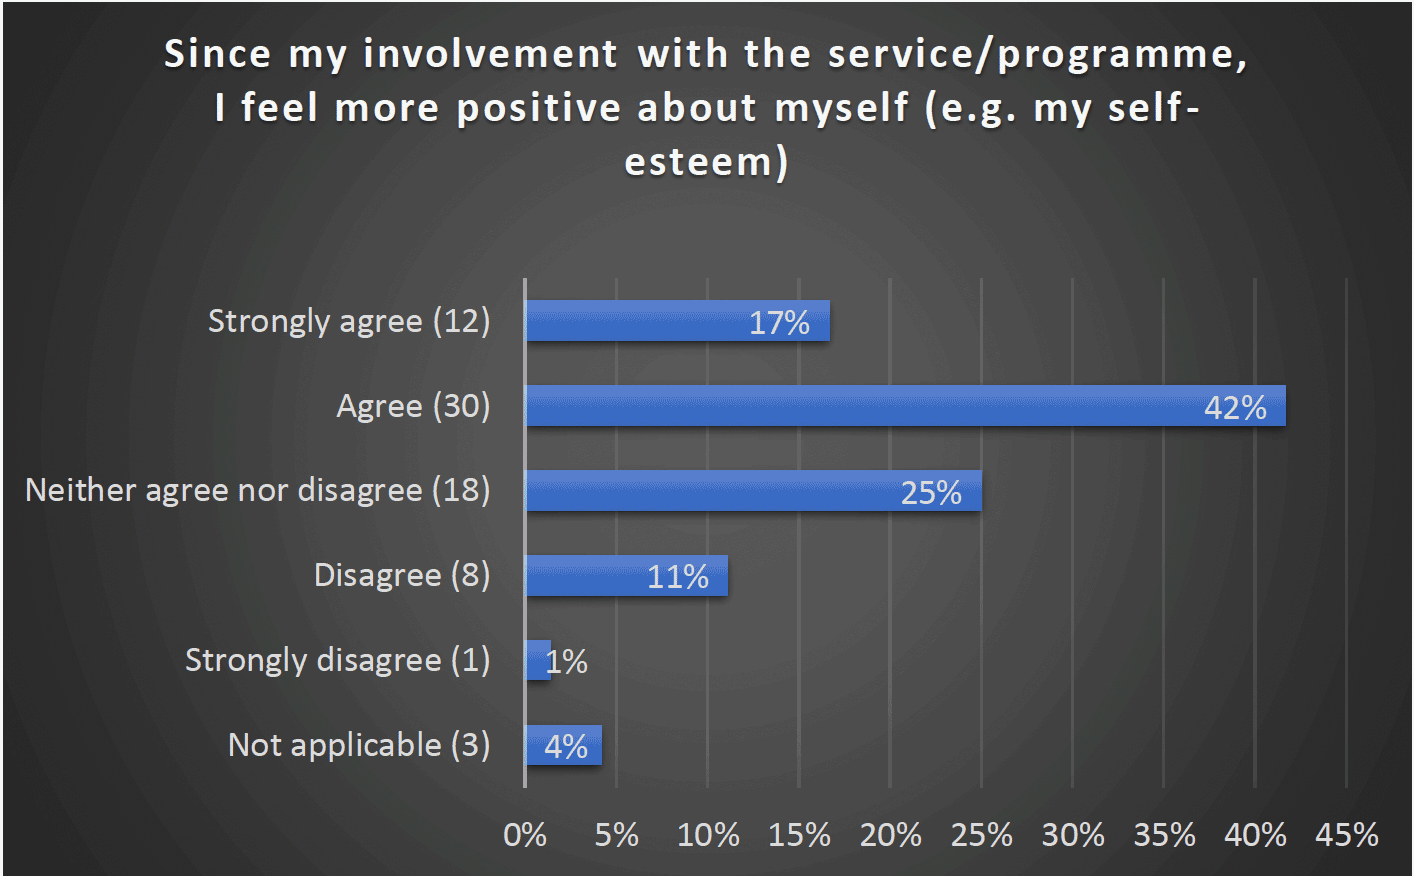 Since my involvement with the service/programme, I feel more positive about myself (e.g. my self- esteem) - Strongly agree (12) 17%, Agree (30) 42%, Neither agree nor disagree (18) 25%, Disagree (8) 11%, Strongly disagree (1) 1%, Not applicable (3) 4%